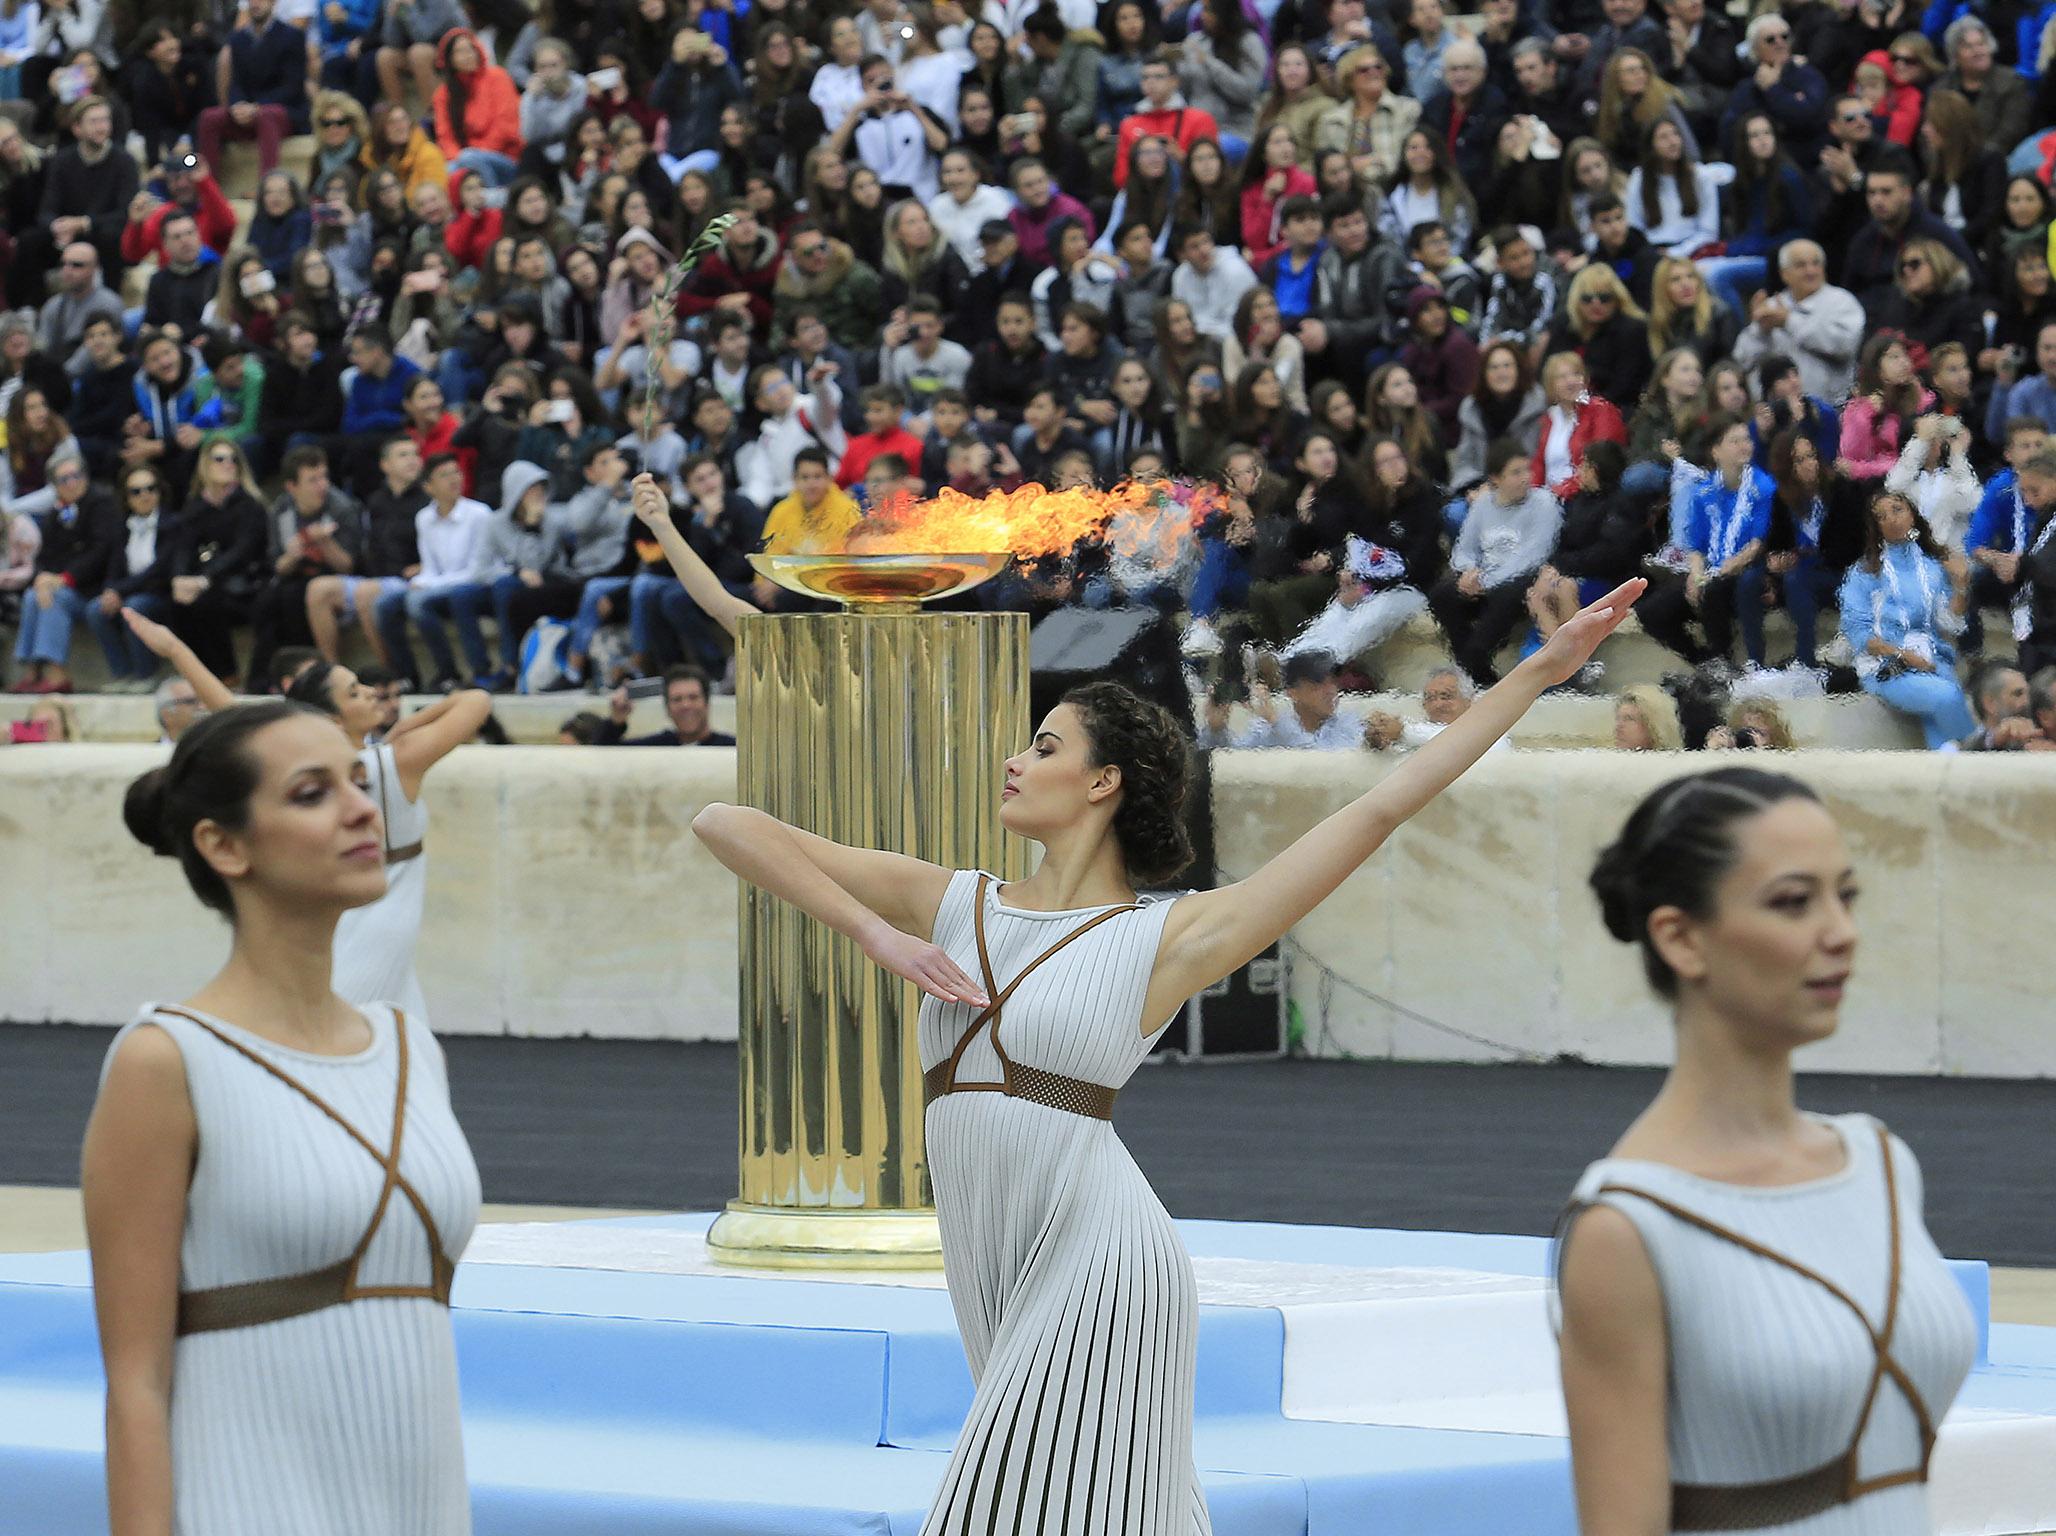 The Olympic flame was passed to South Korea in an Athens ceremony